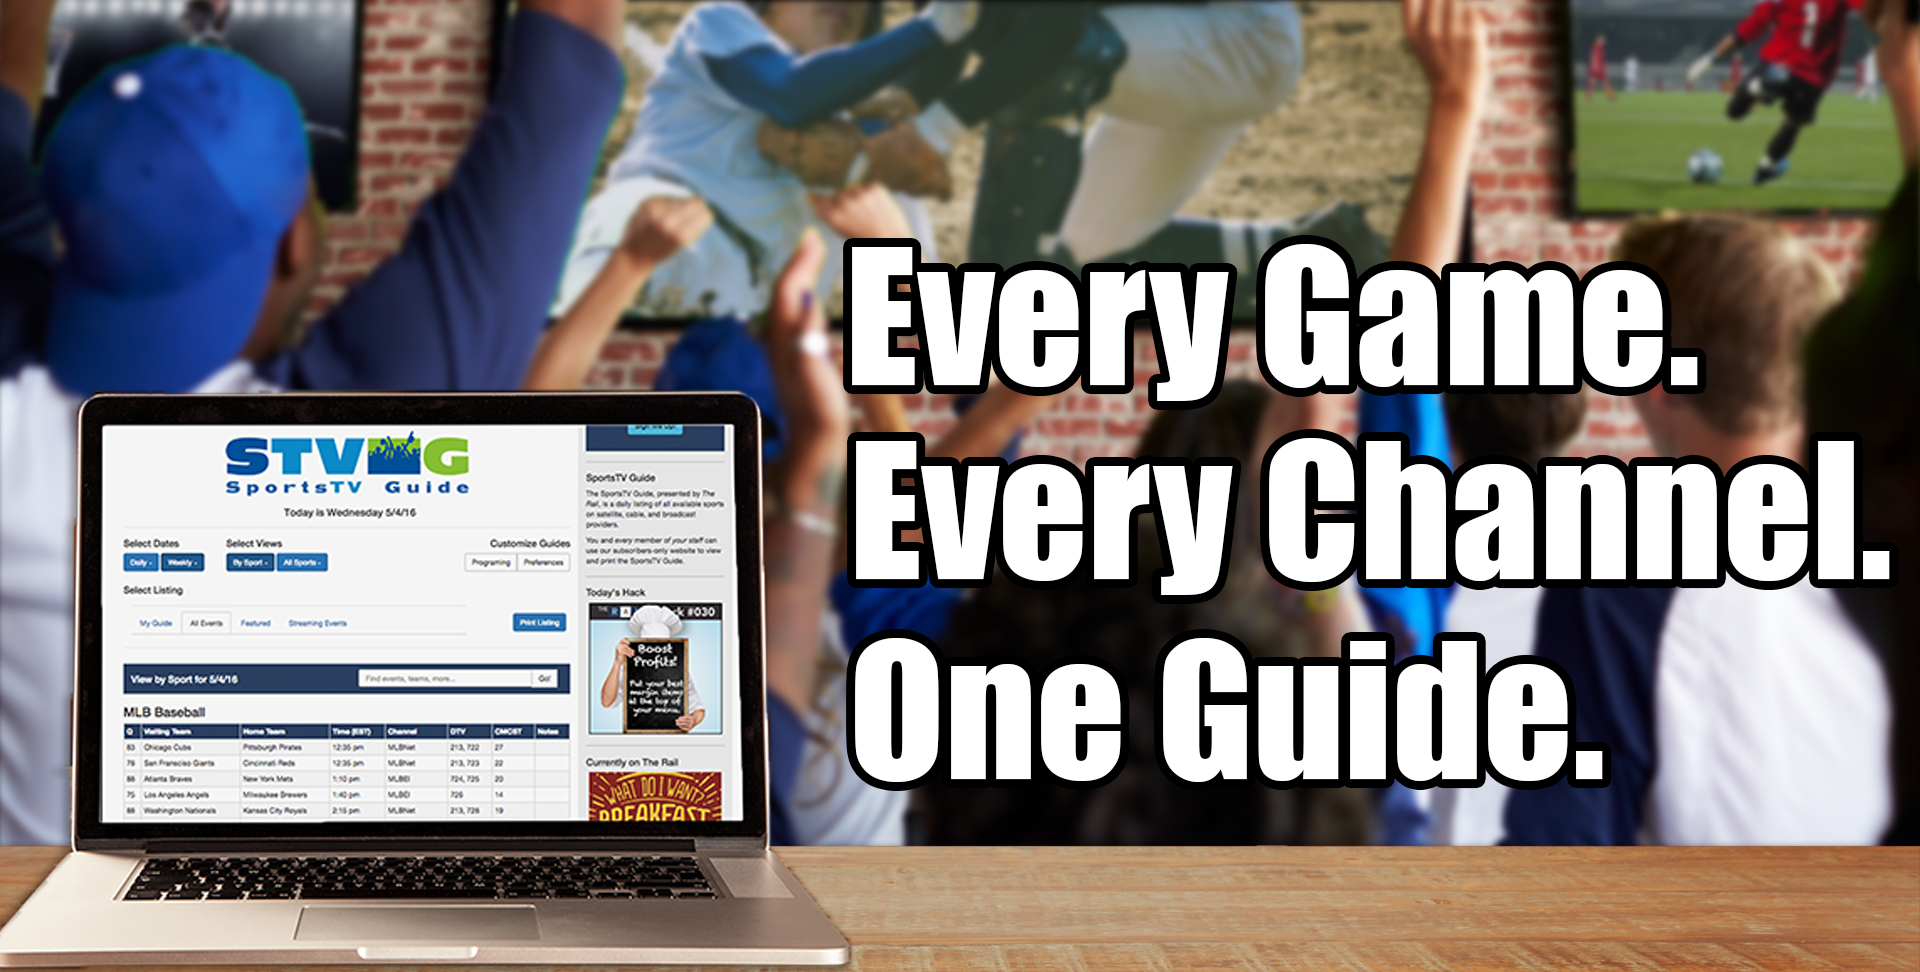 Start Your Free Trial of the SportsTV Guide! — The Rail